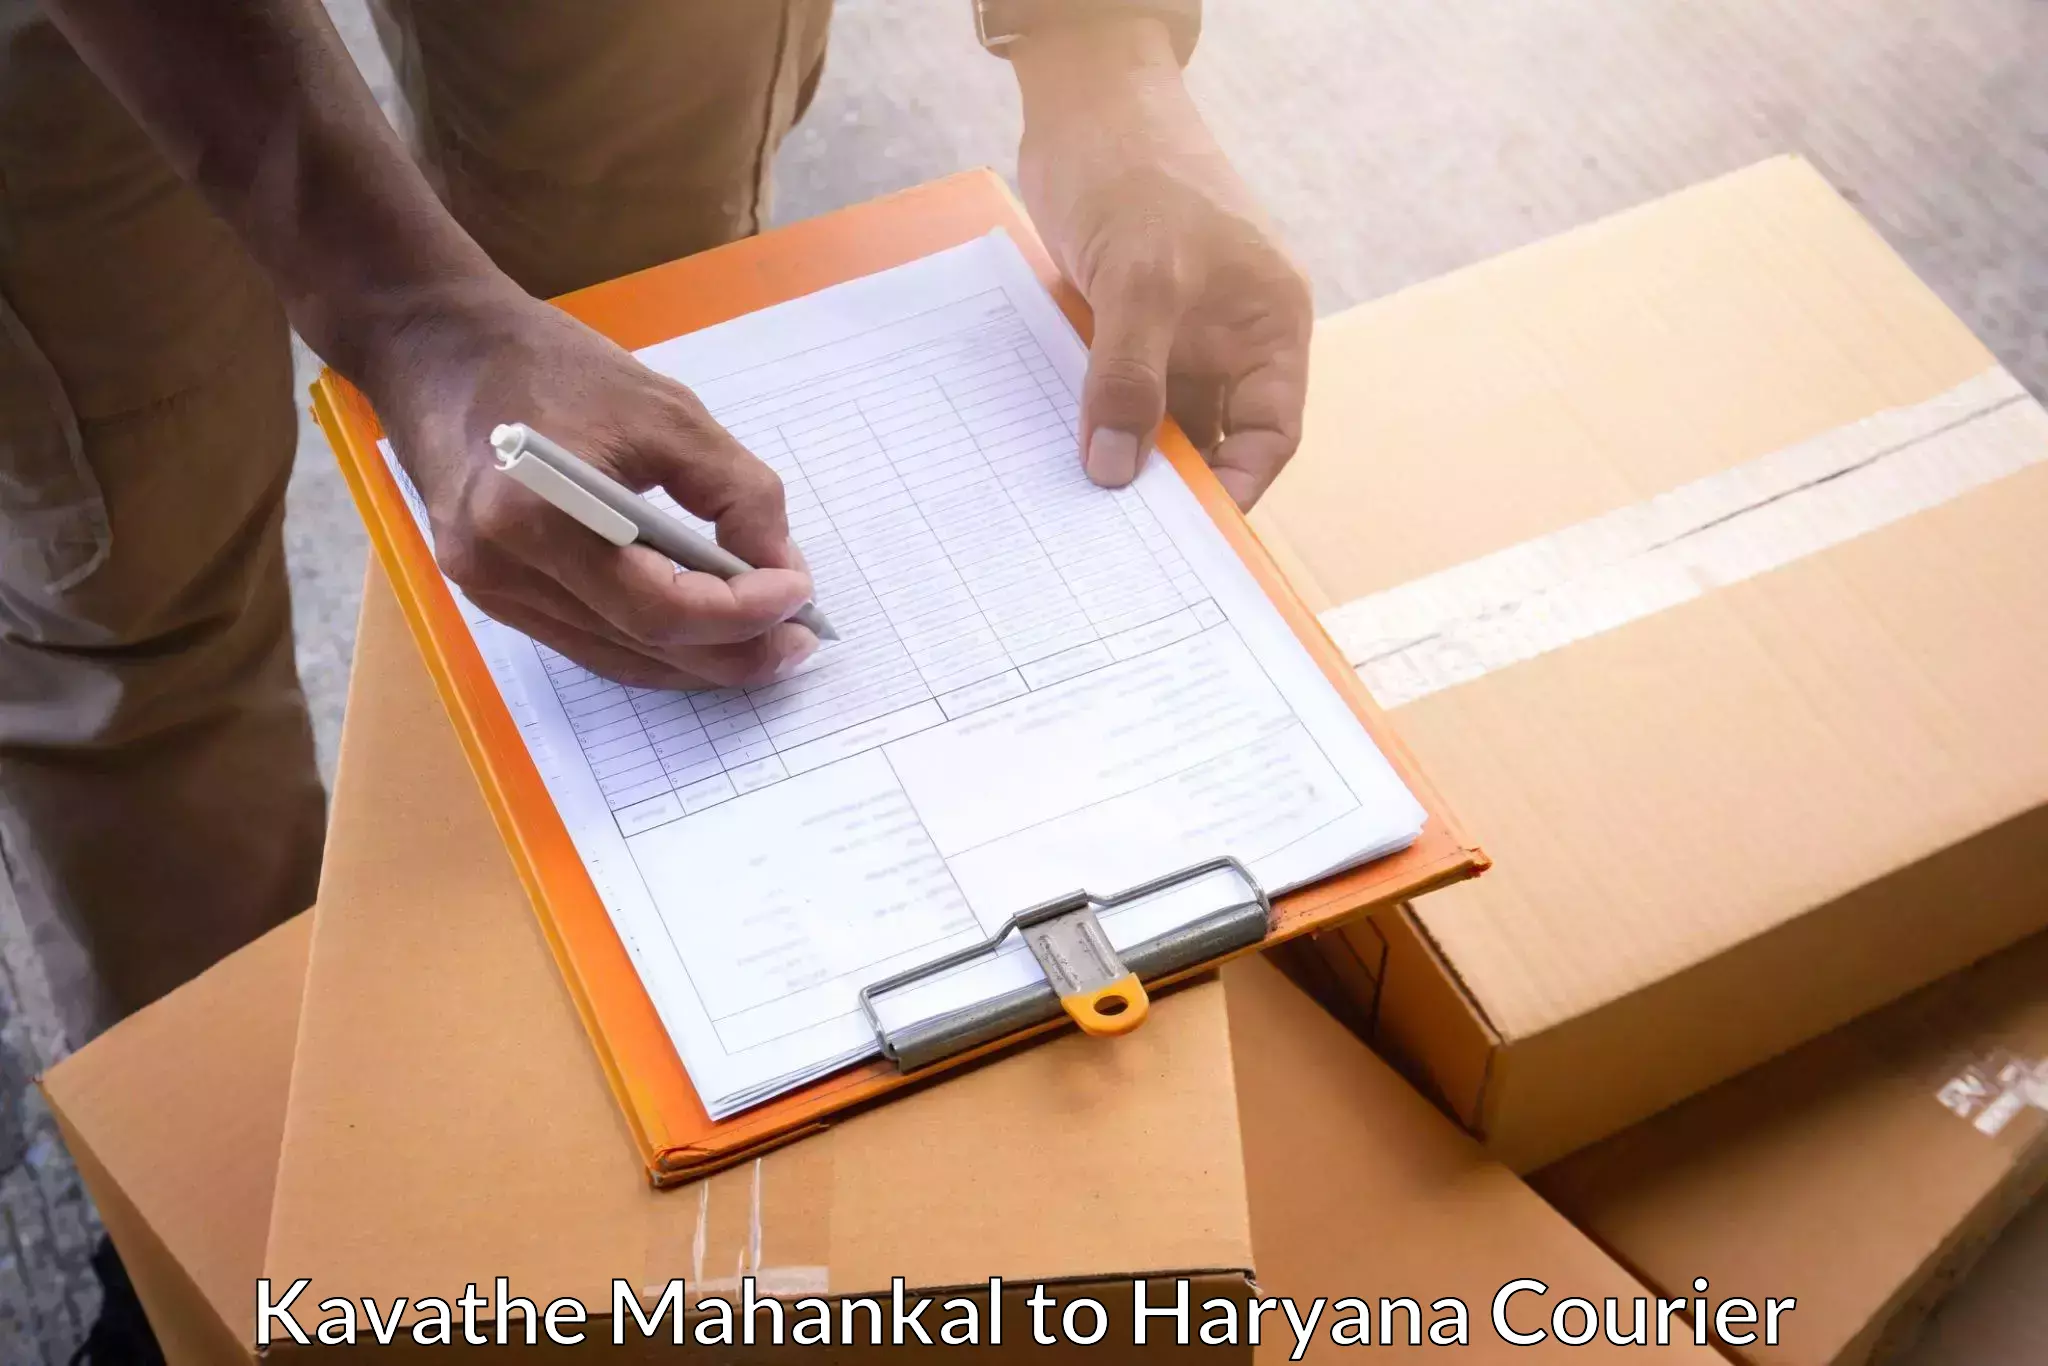 Multi-national courier services Kavathe Mahankal to Kaithal